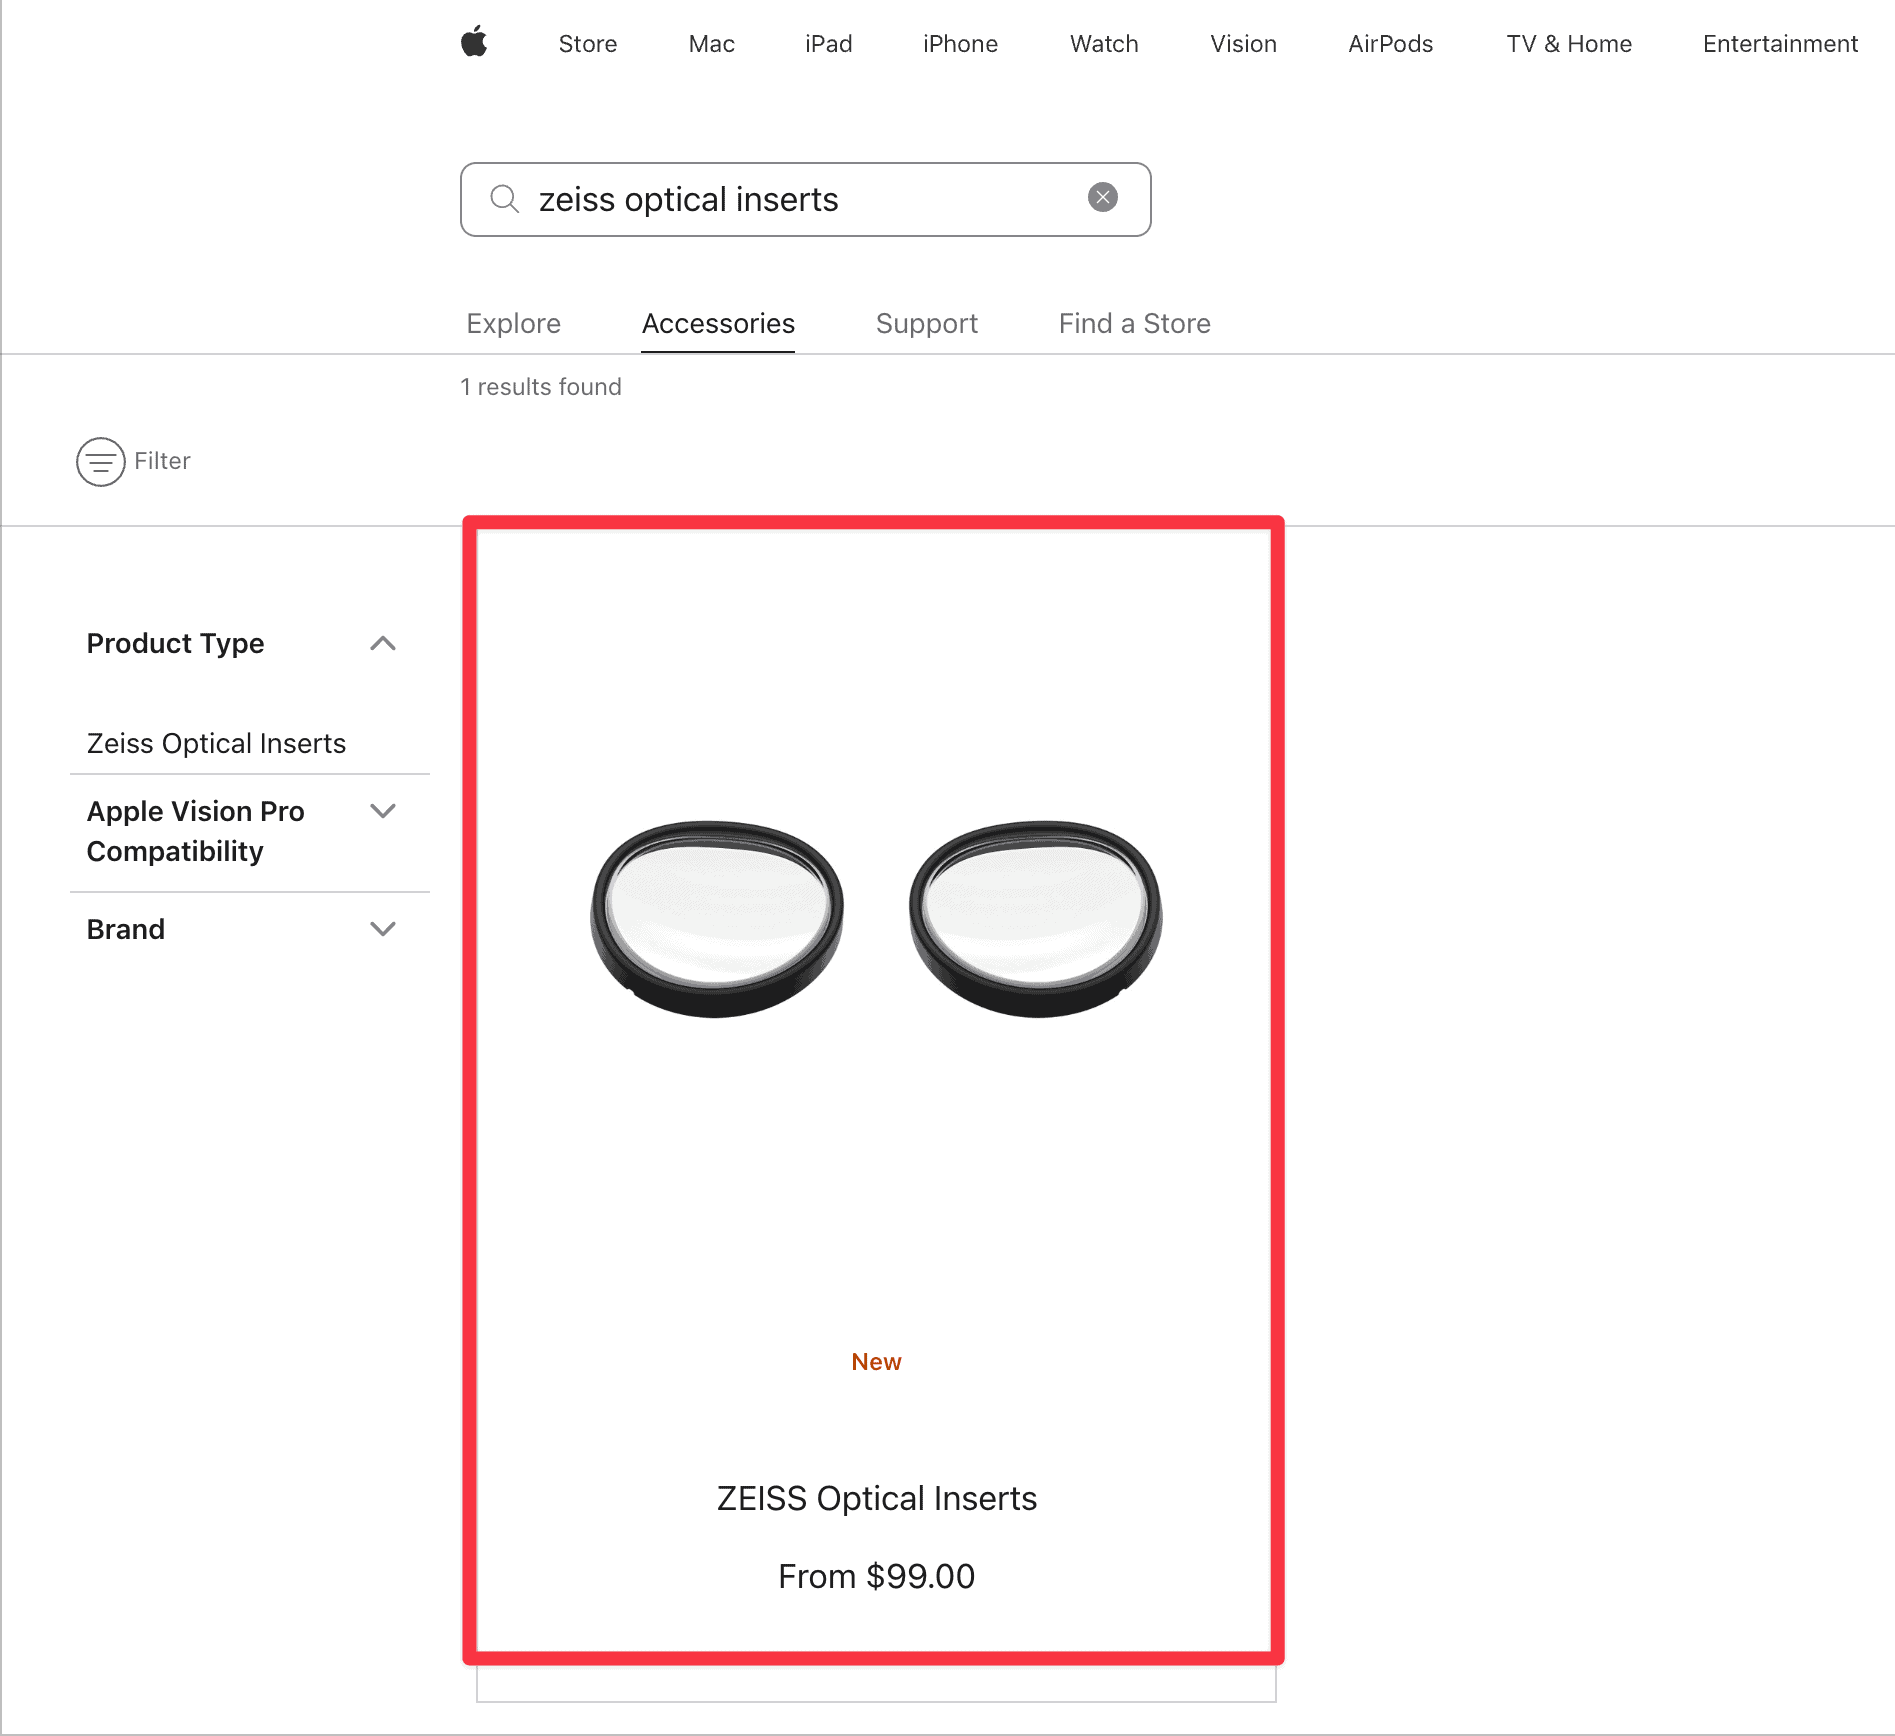 Select Zeiss Optical Inserts from the search page